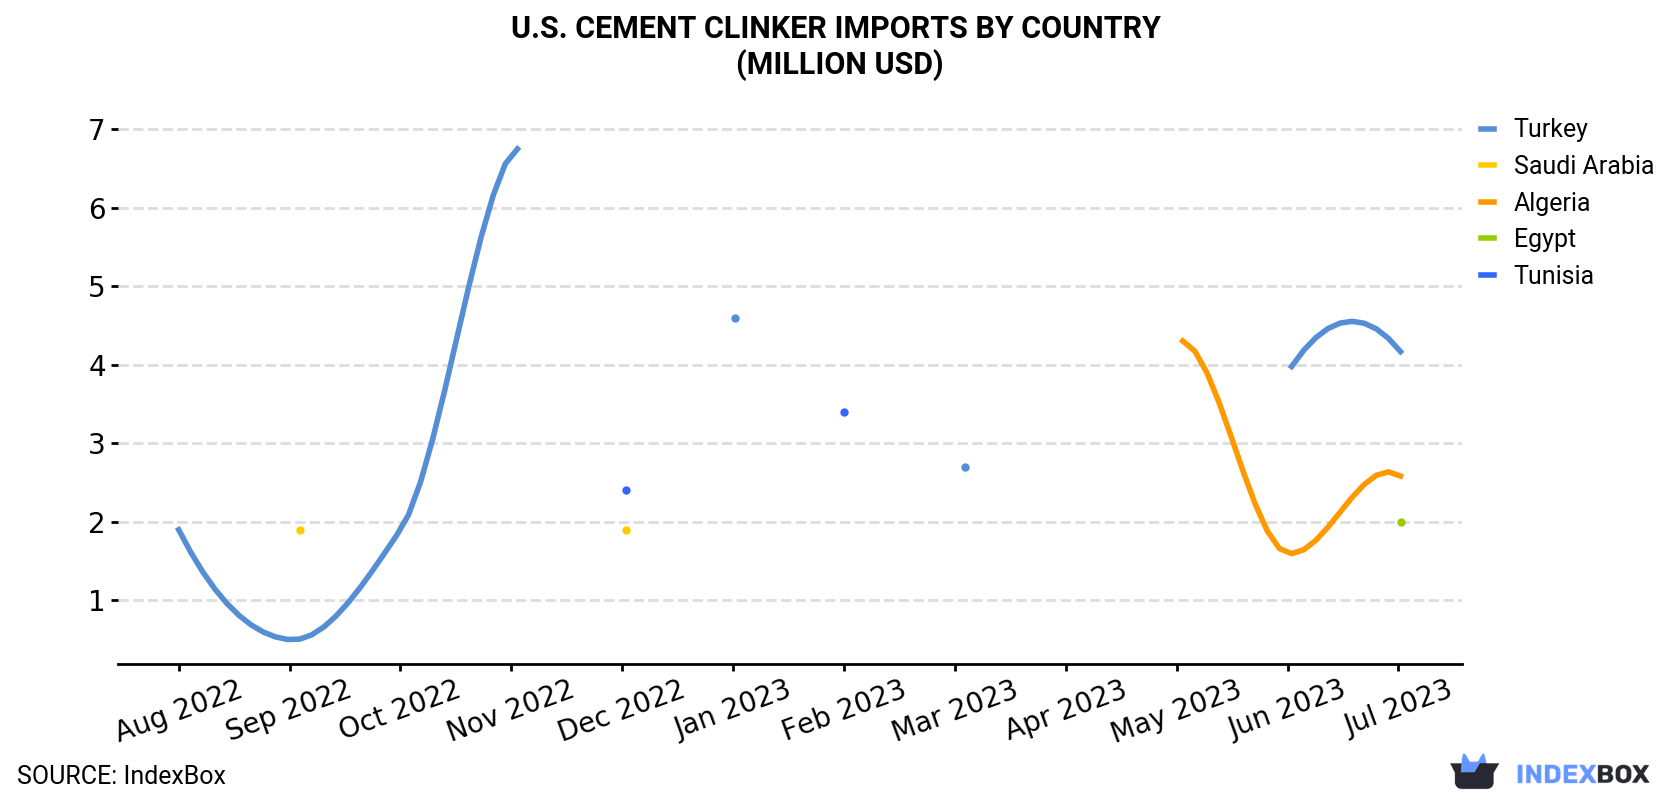 U.S. Cement Clinker Imports By Country (Million USD)